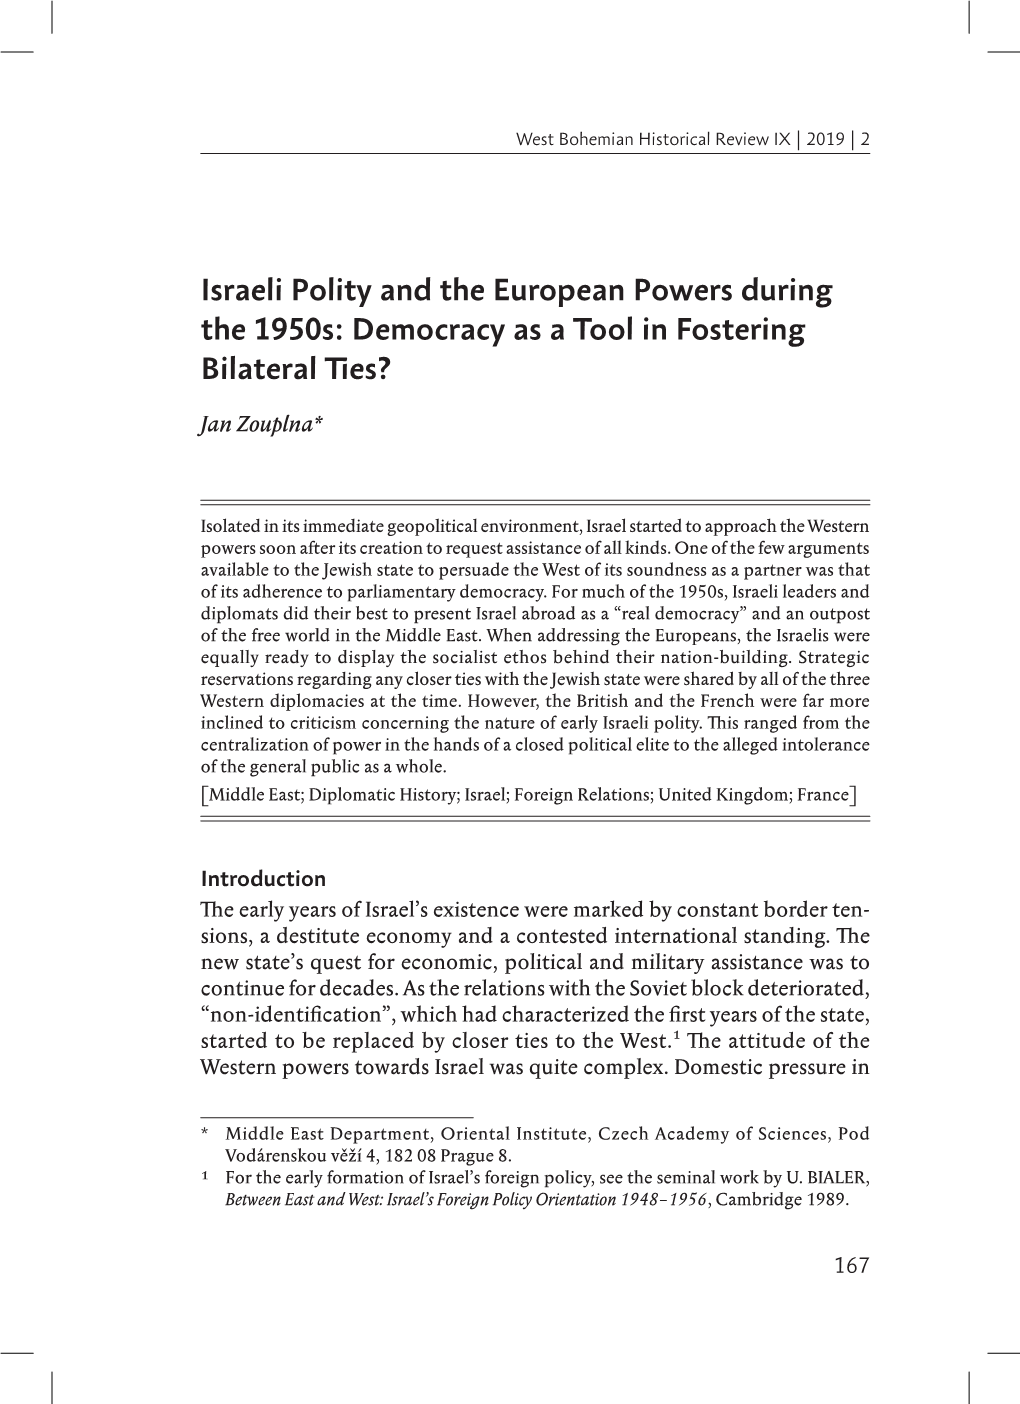 Israeli Polity and the European Powers During the 1950S: Democracy As a Tool in Fostering Bilateral Ties?